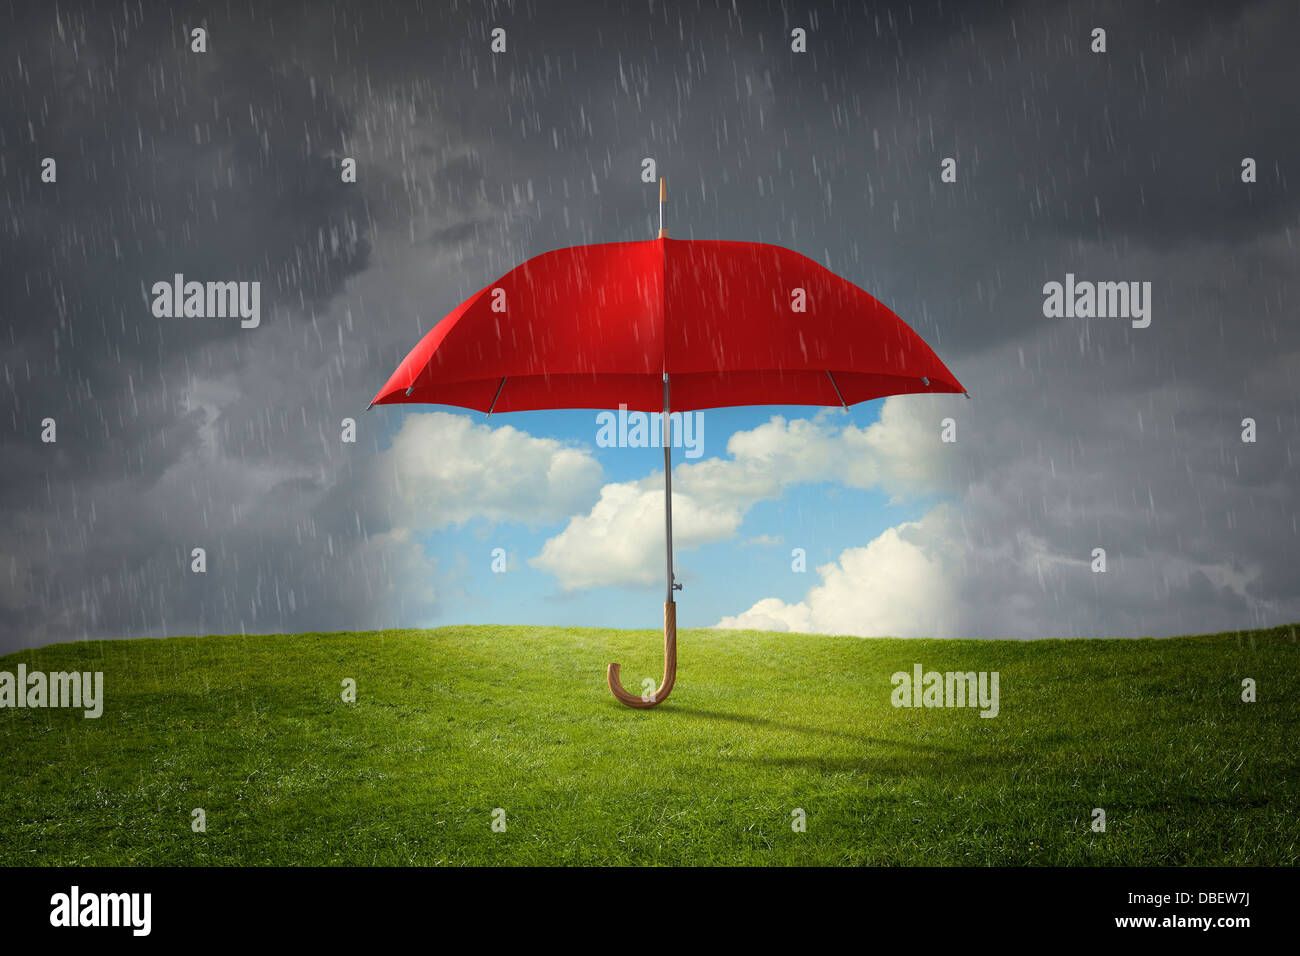 Red umbrella protecting grass from rain Stock Photo